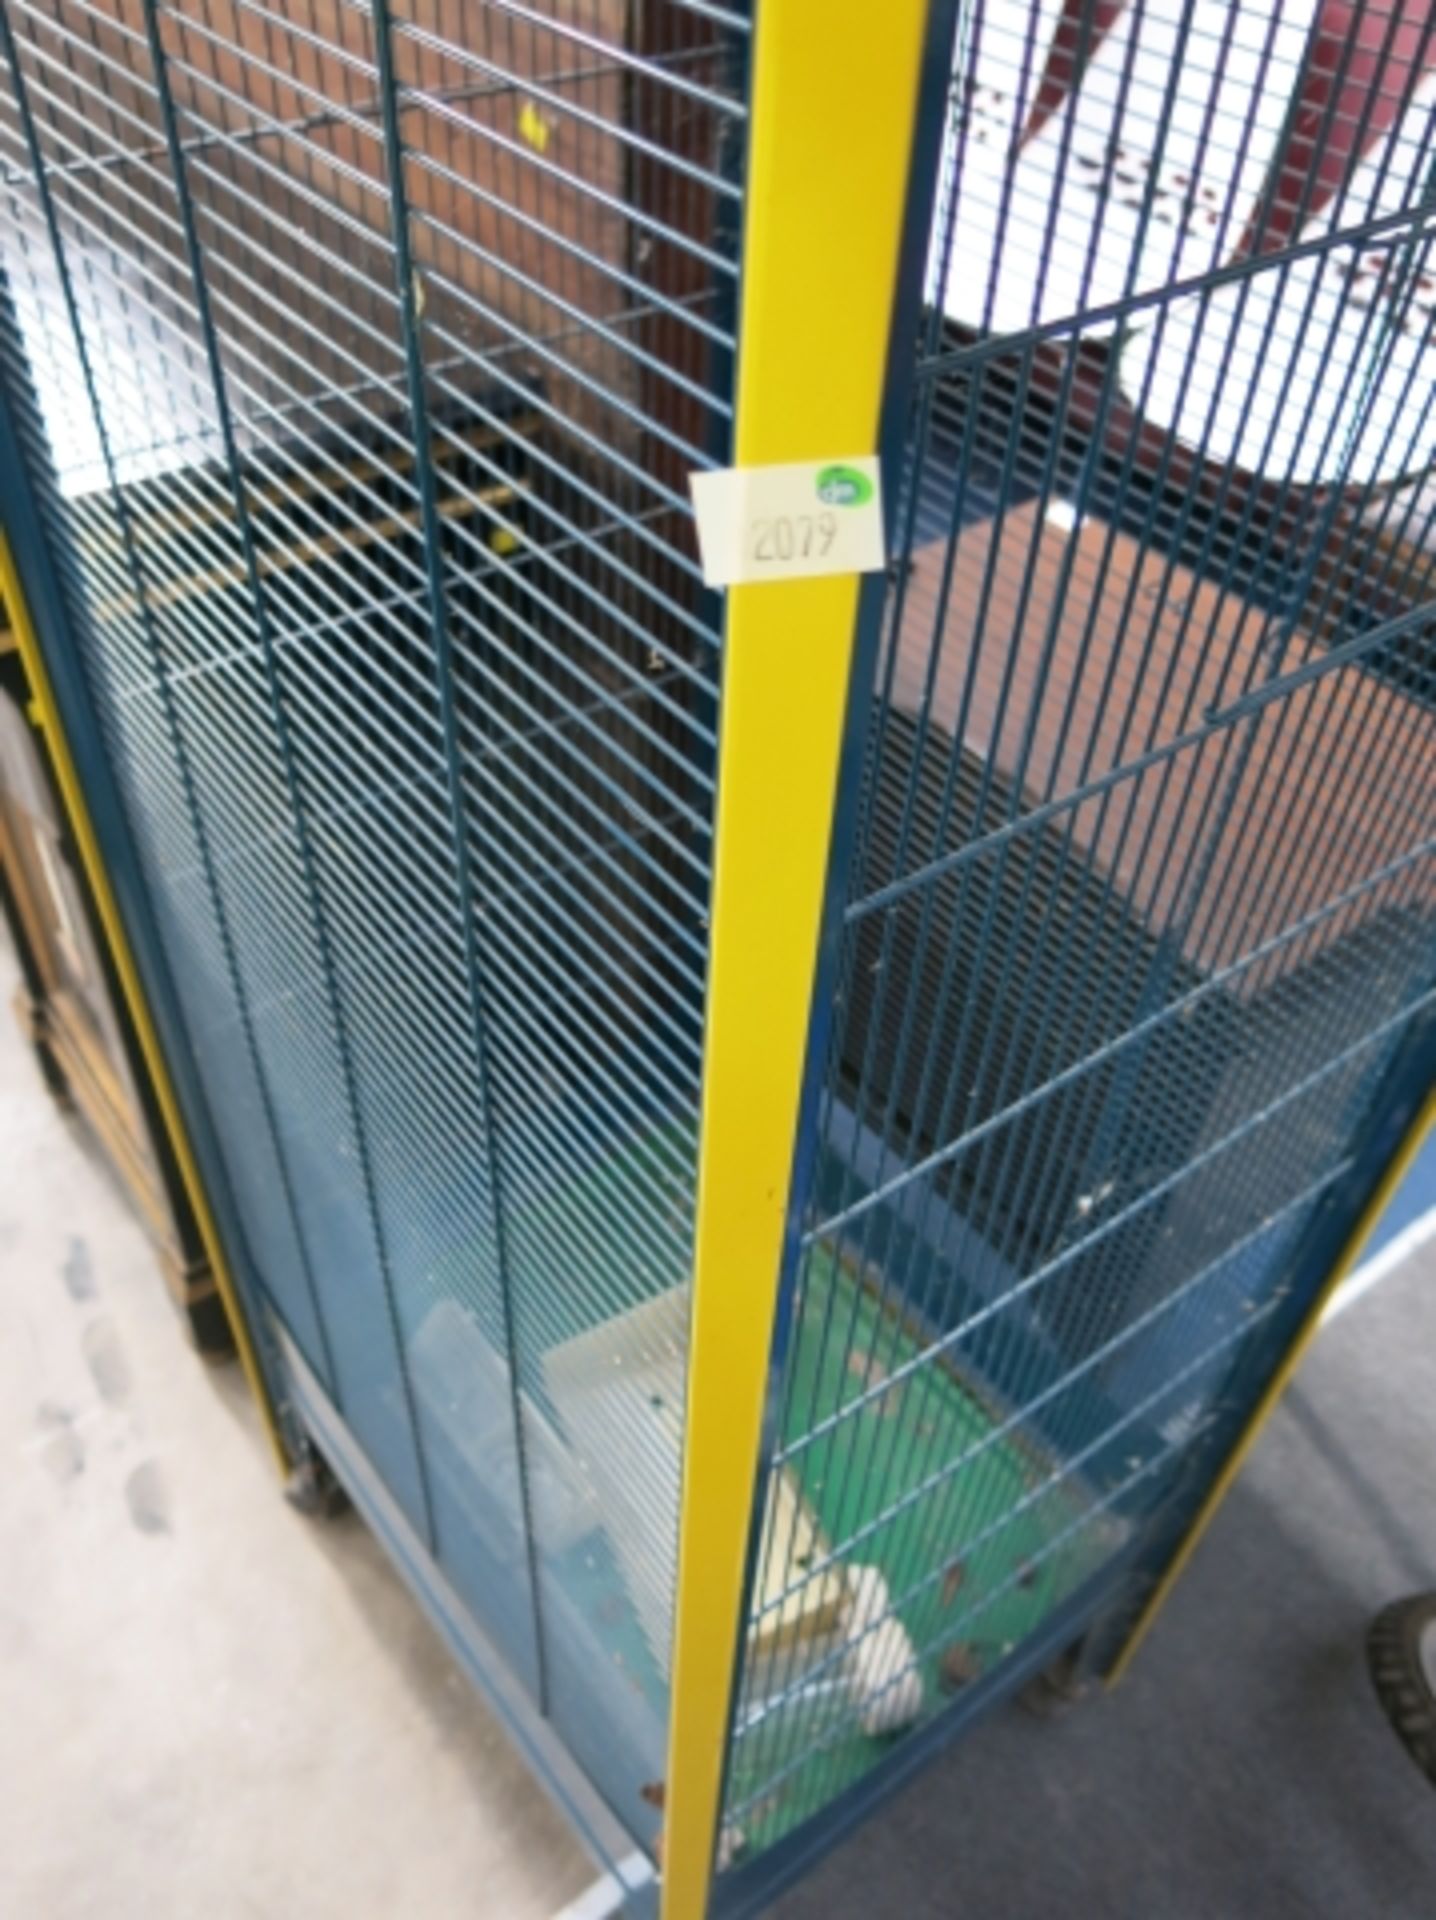 A Ferplast bird aviary in green and yellow metal with some accessories (H160cm, W74cm, D61cm) on - Image 3 of 3